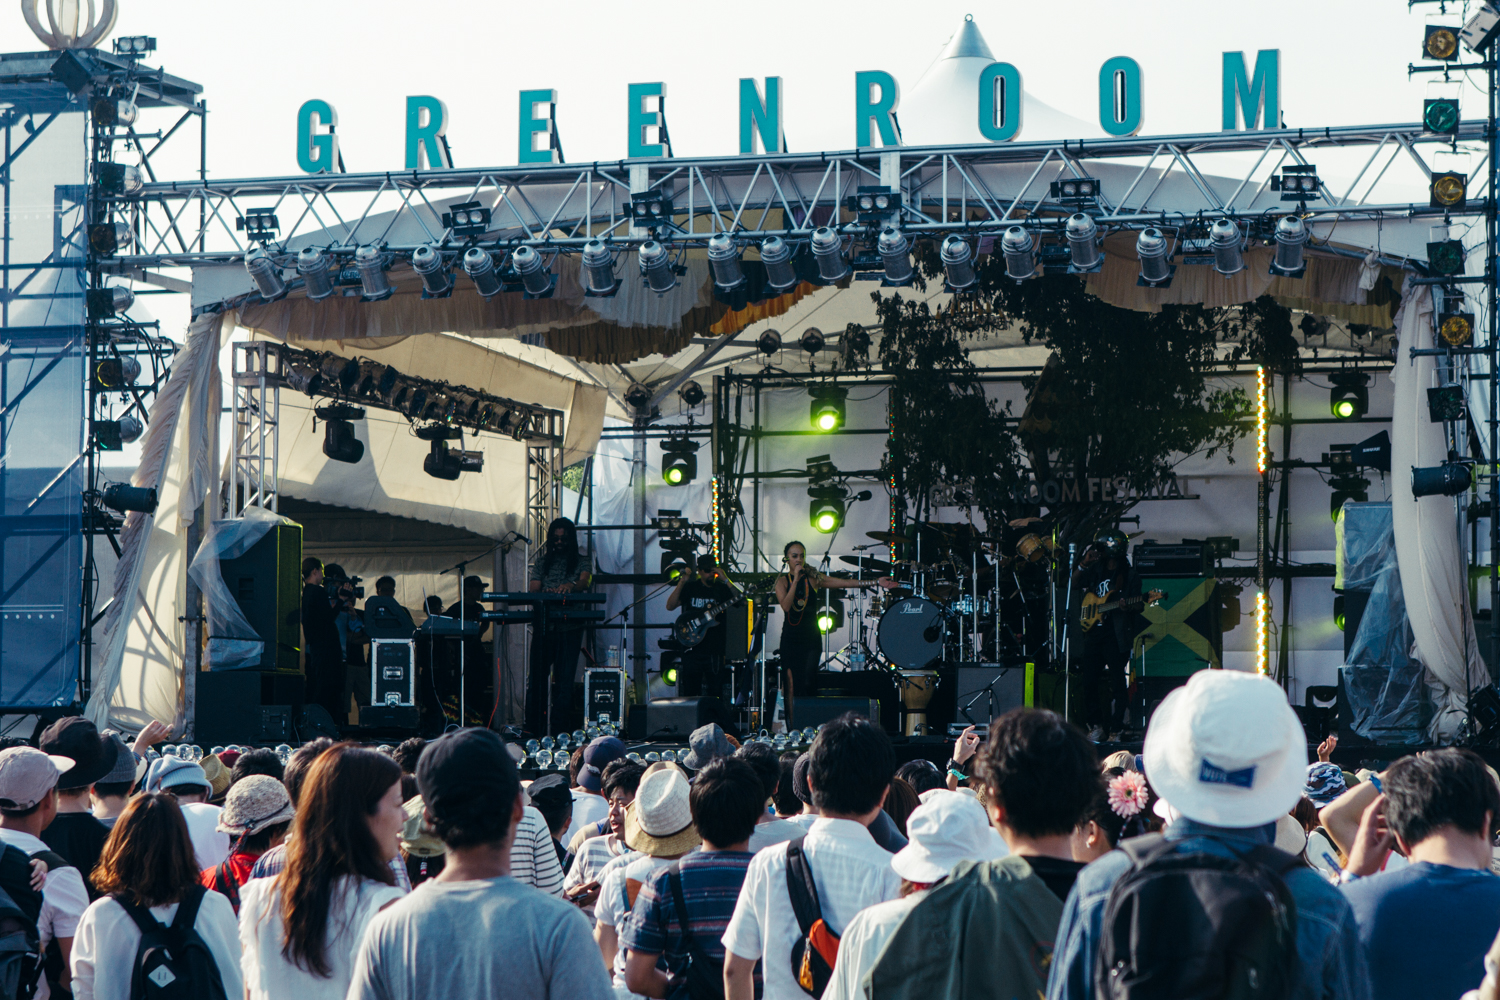 Postcards from Japan: #3Amigos at the Greenroom Festival